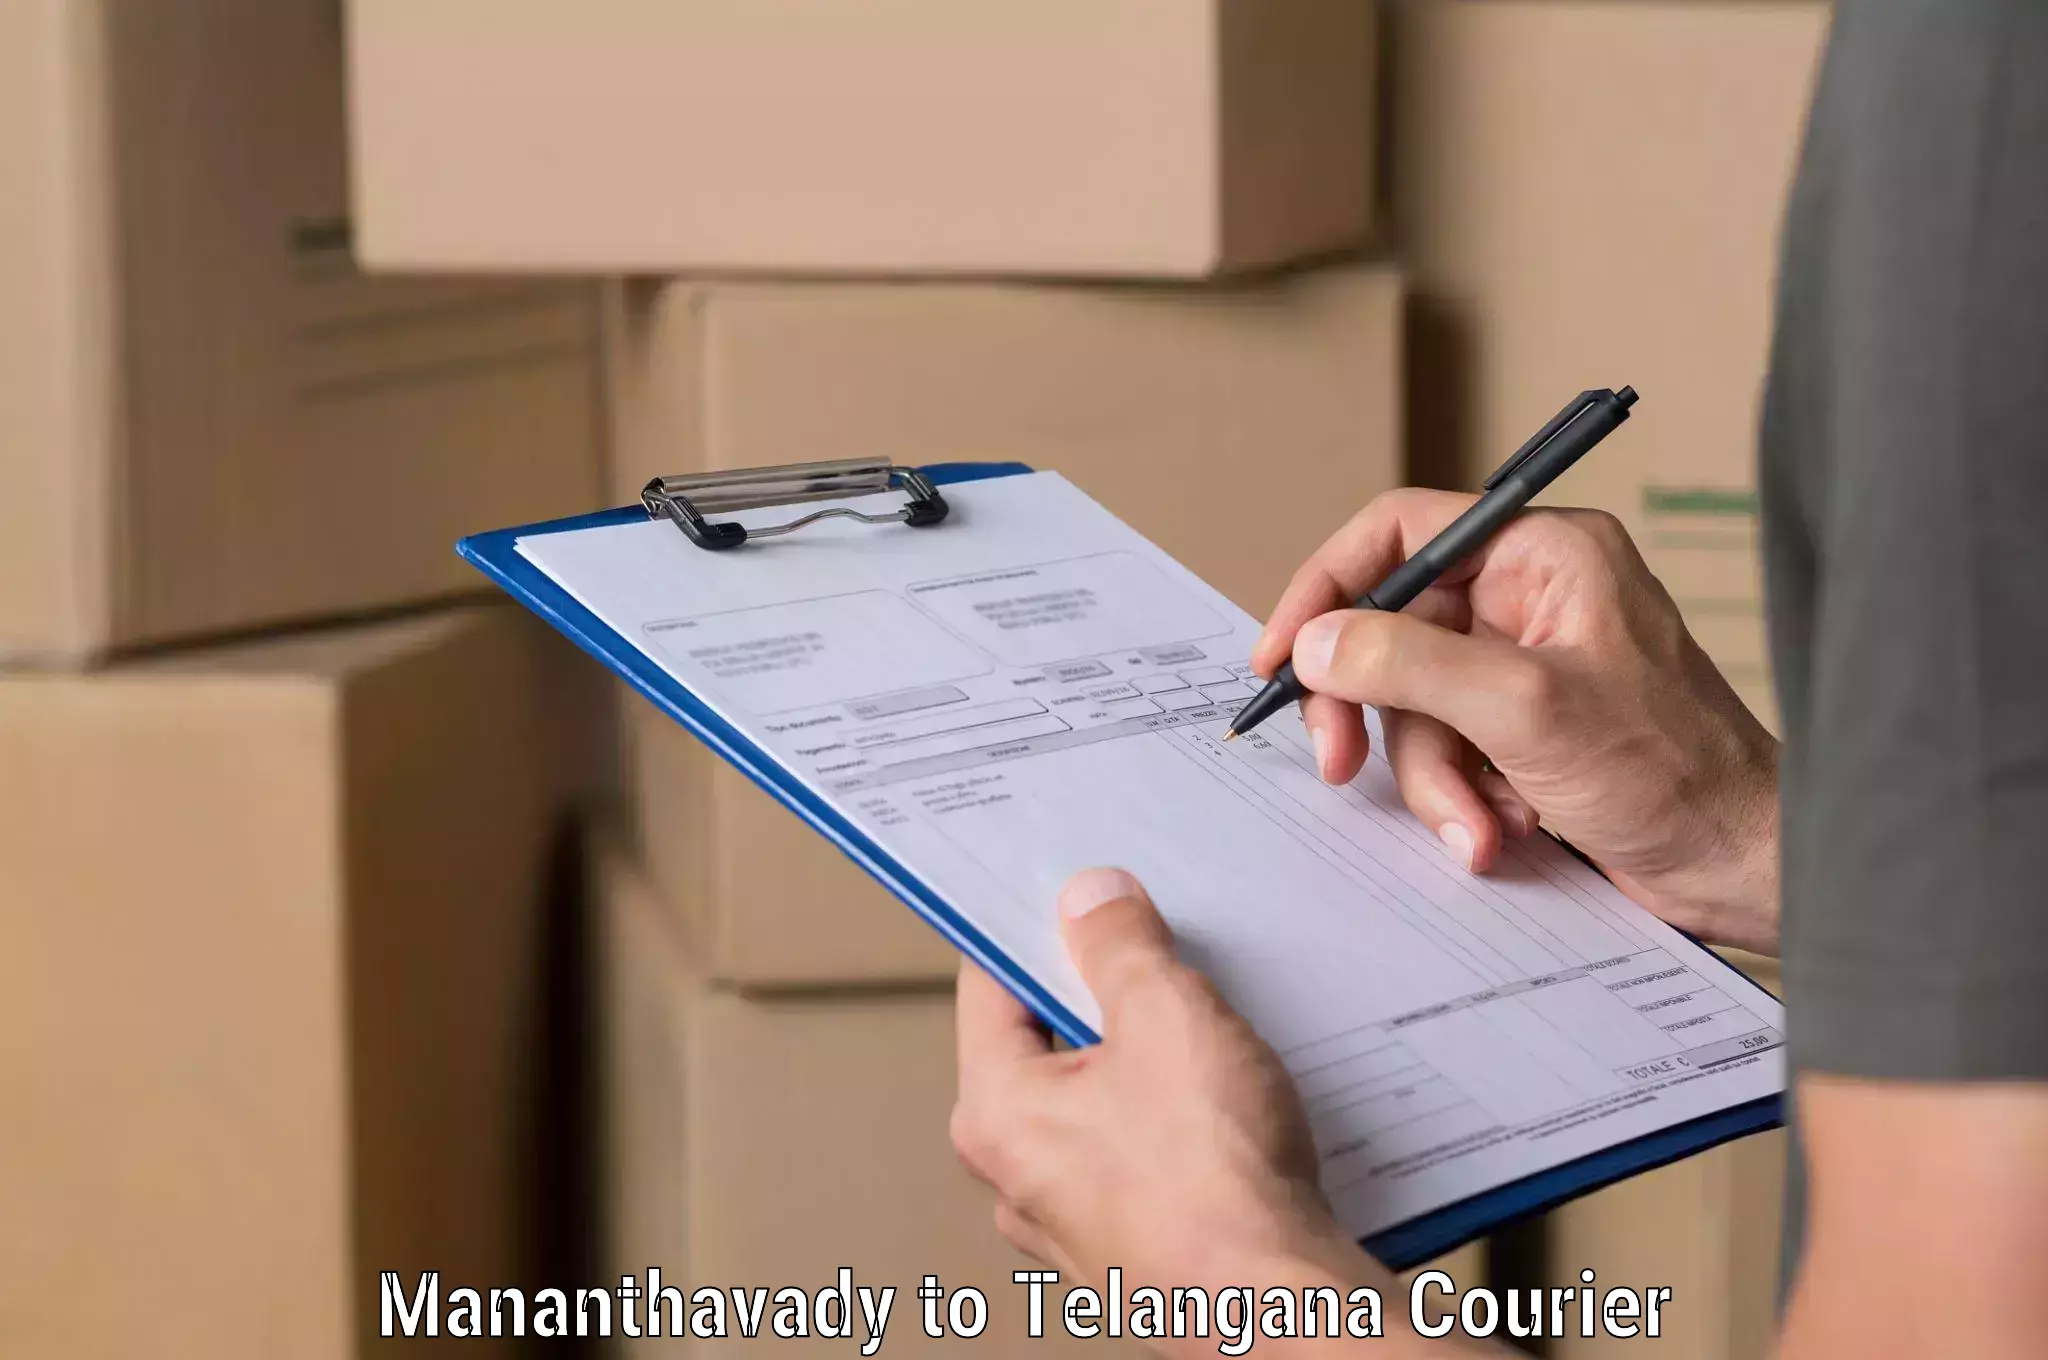 Business delivery service Mananthavady to Tiryani